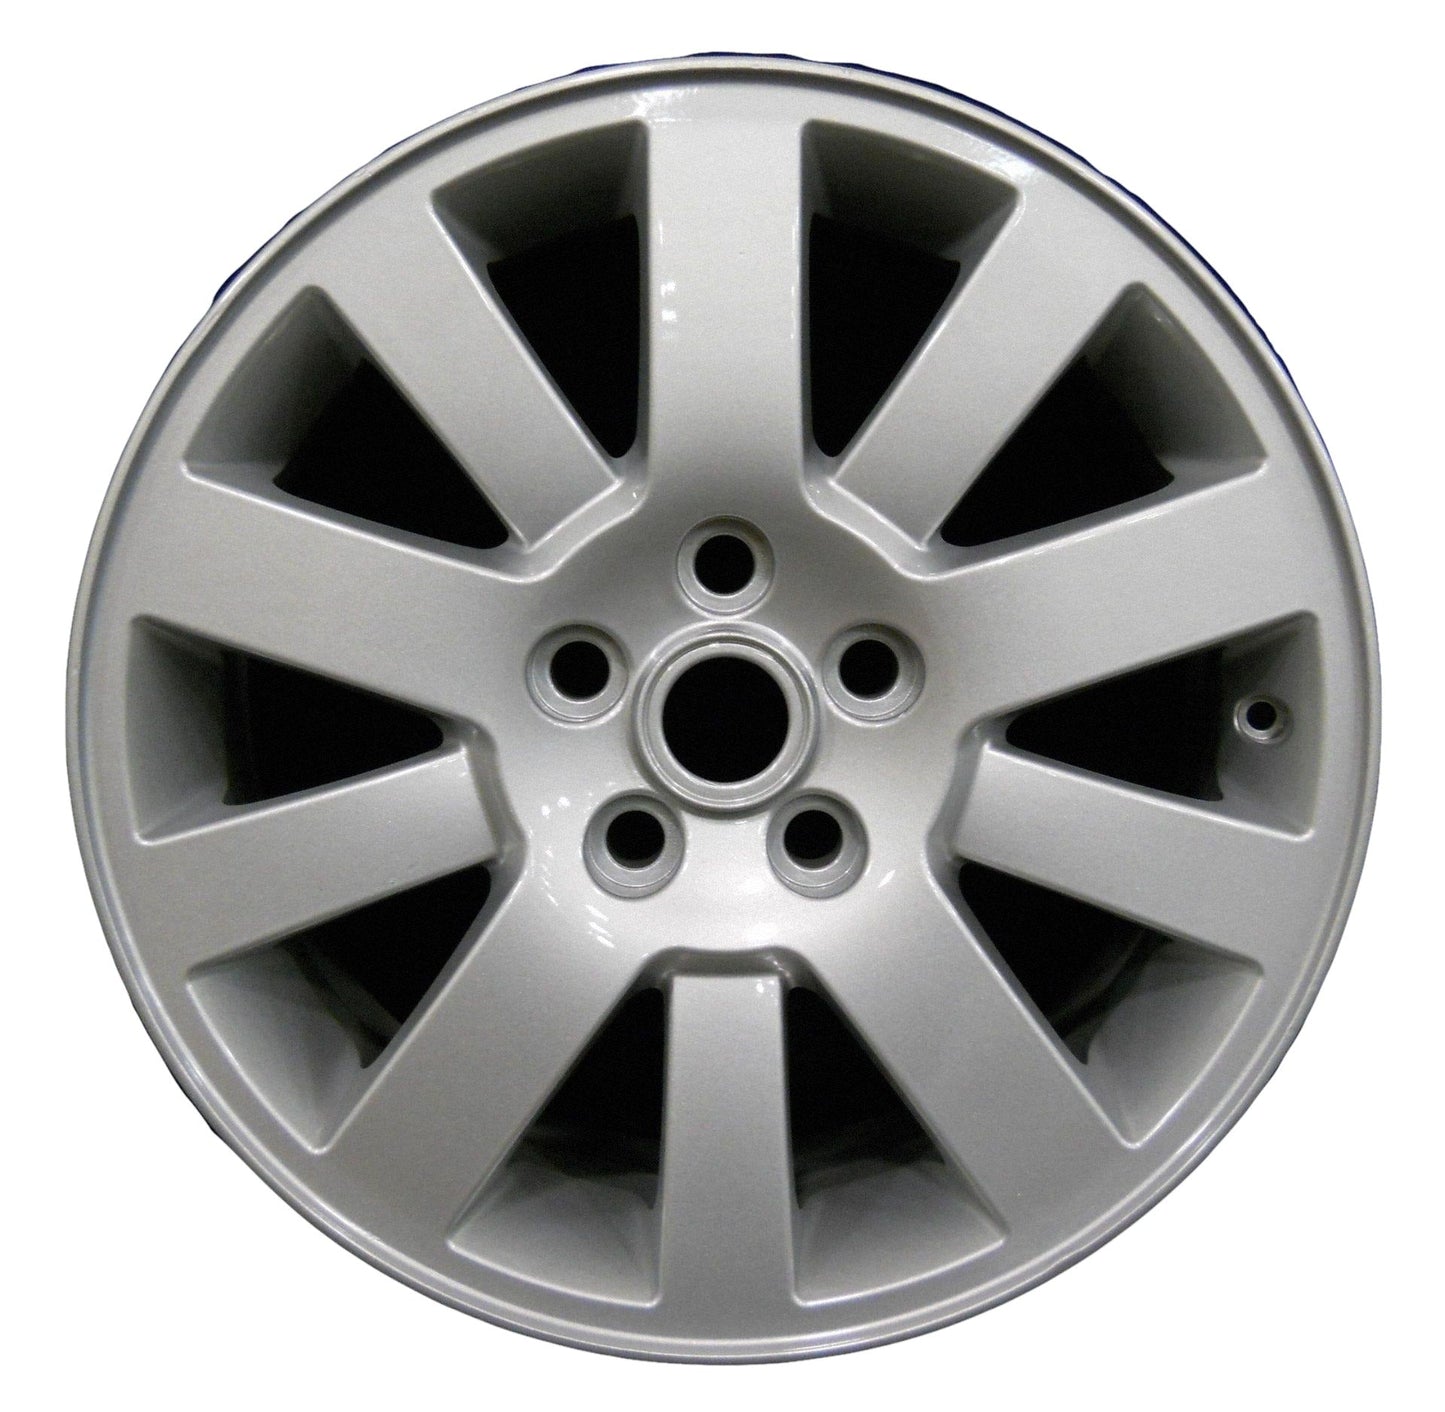 Land Rover LR3  2005, 2006, 2007, 2008, 2009 Factory OEM Car Wheel Size 18x8 Alloy WAO.72190.PS13.FF